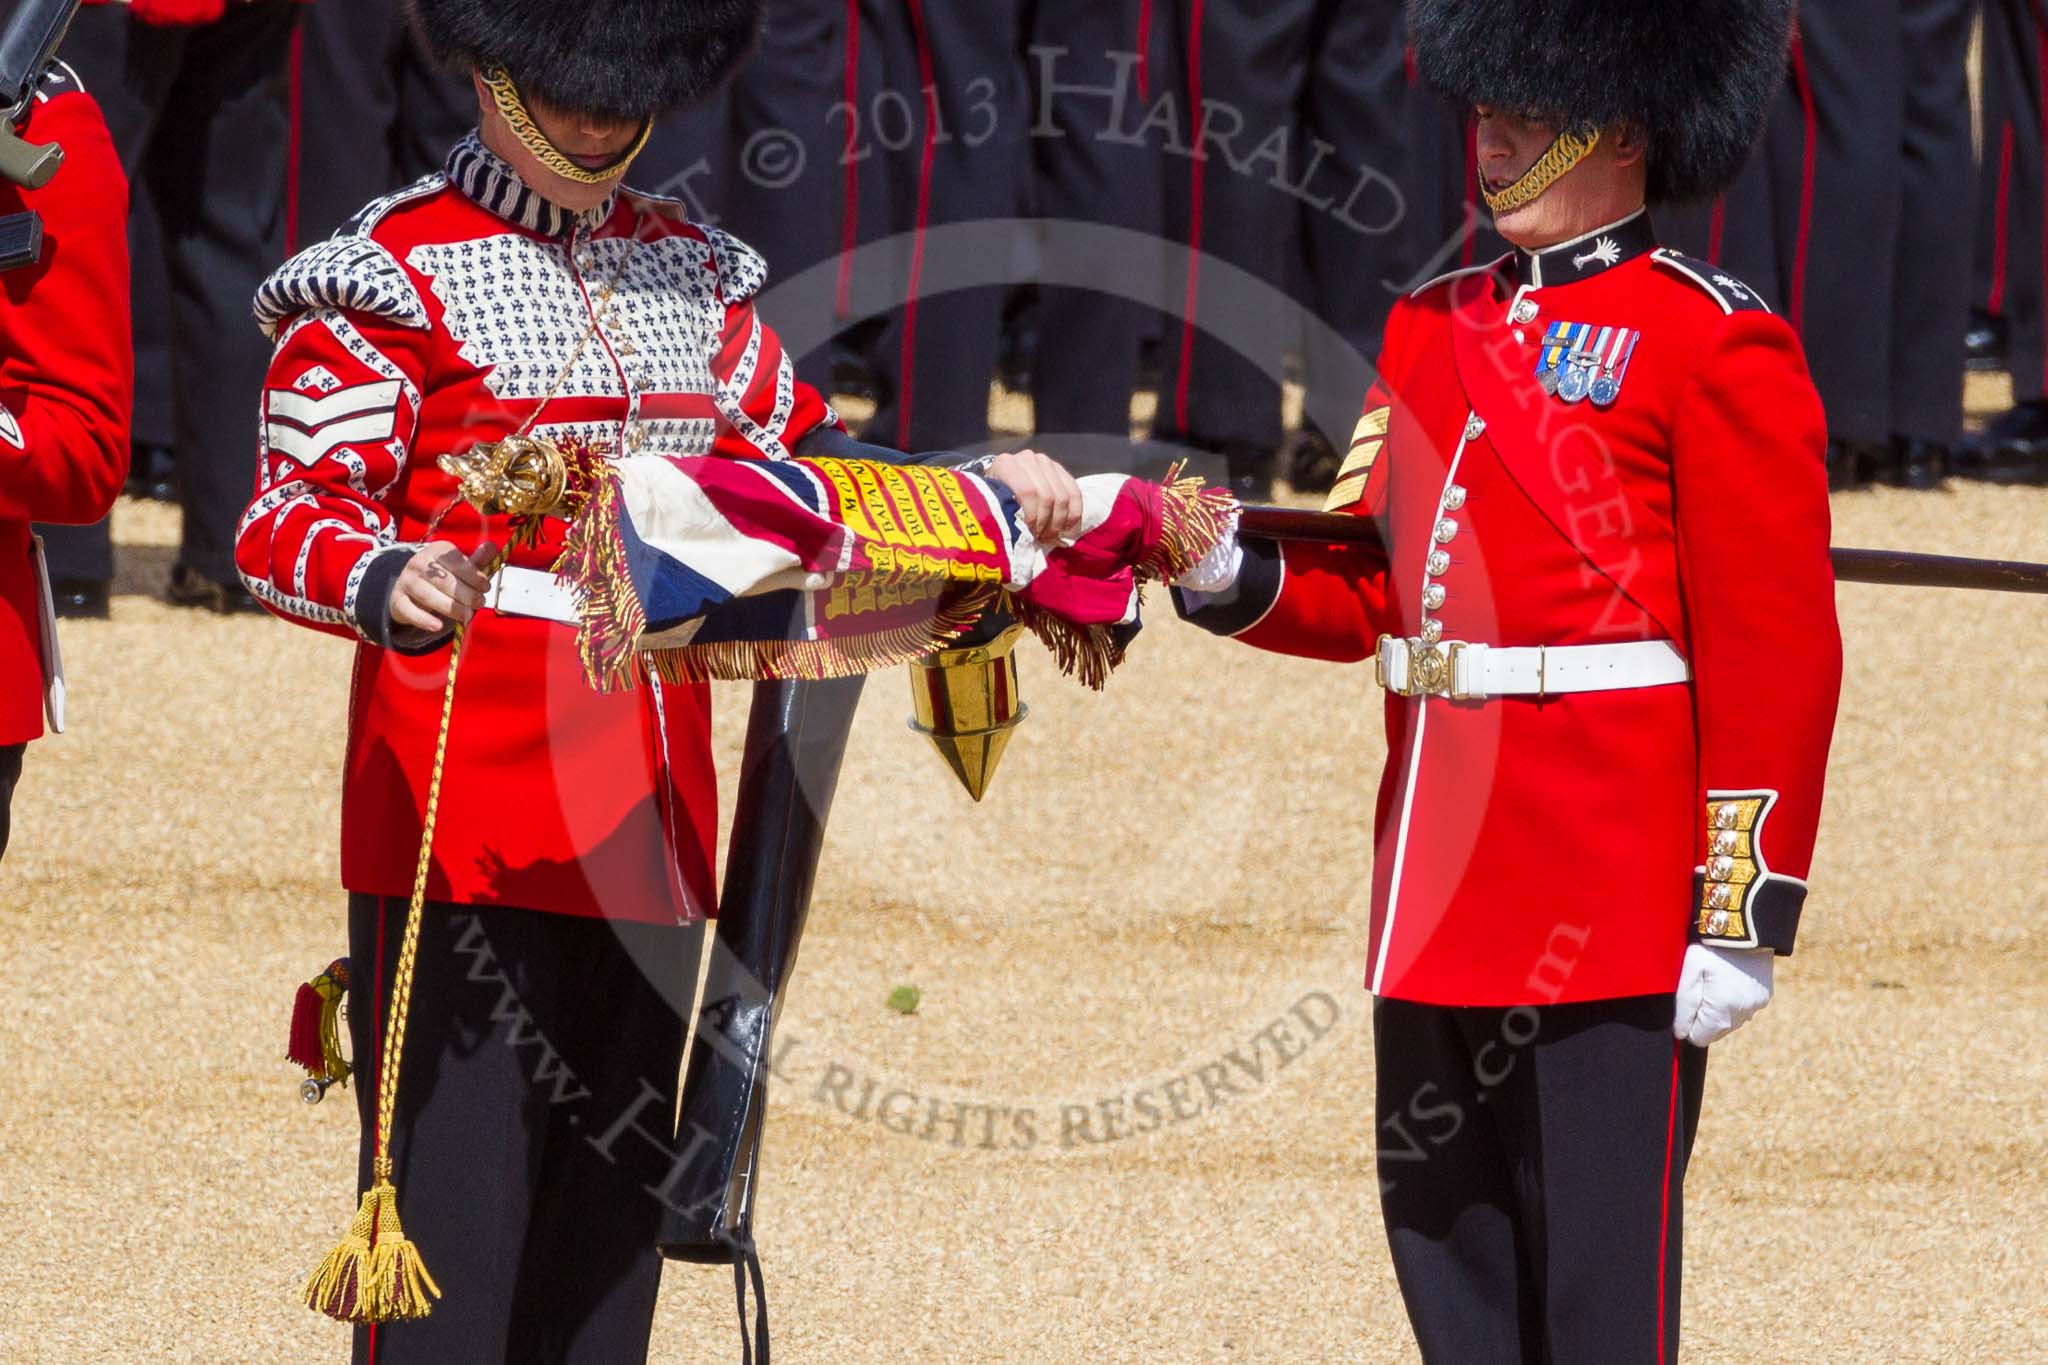 The Colonel's Review 2015.
Horse Guards Parade, Westminster,
London,

United Kingdom,
on 06 June 2015 at 10:35, image #105